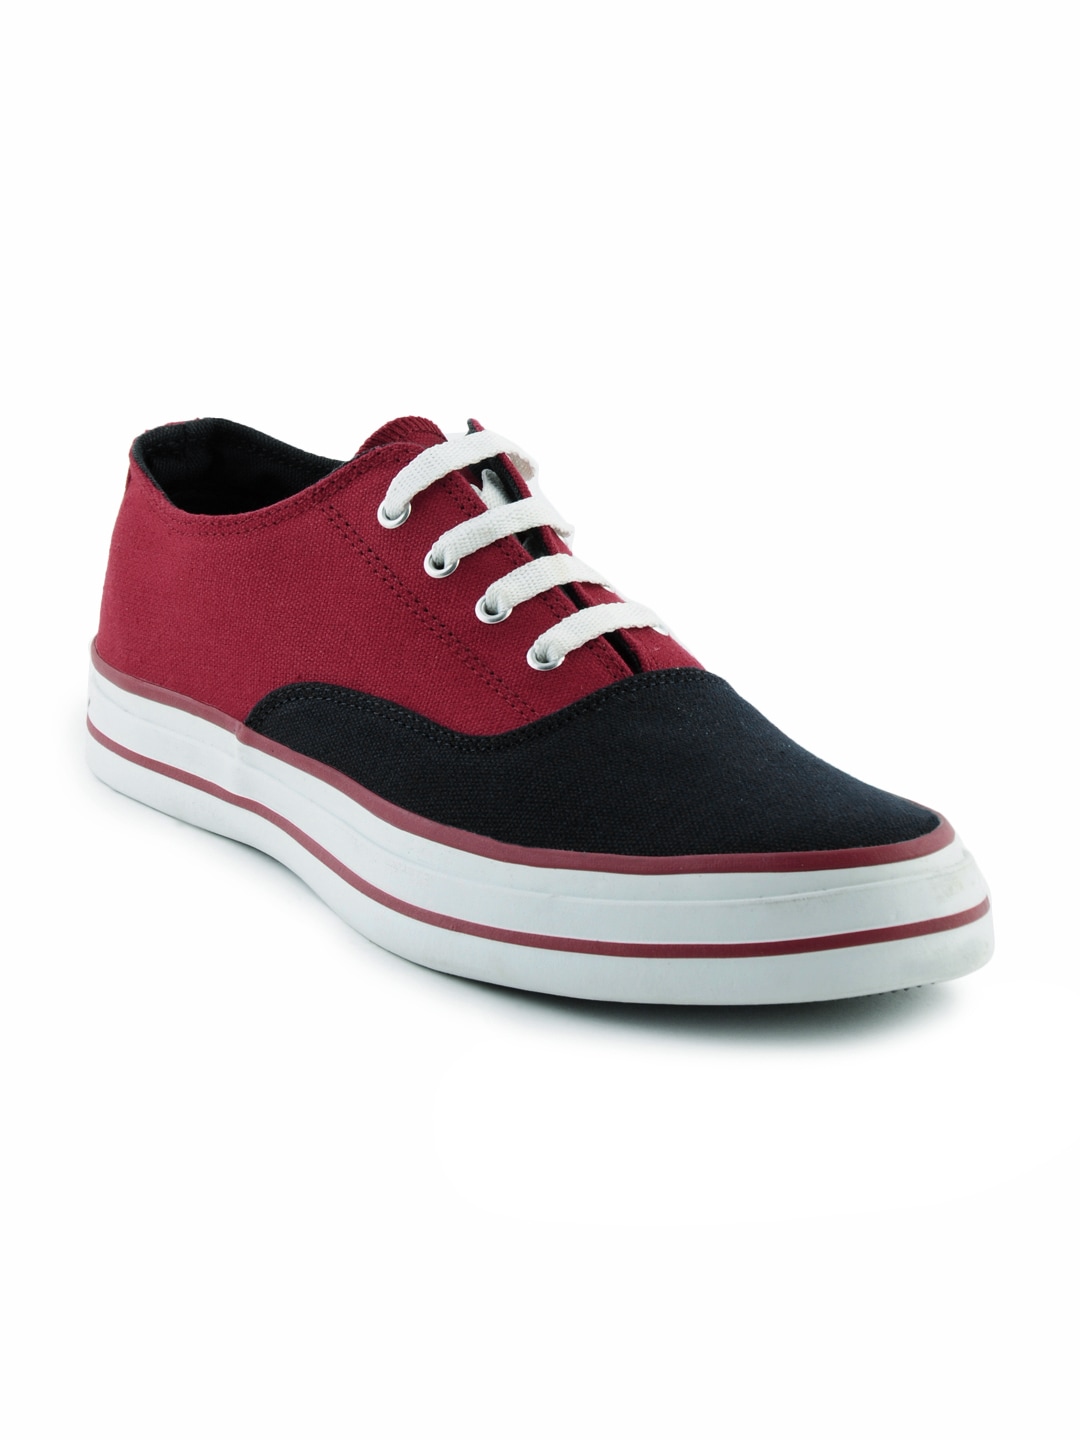 Converse Unisex Contrast Oxford Red Casual Shoes